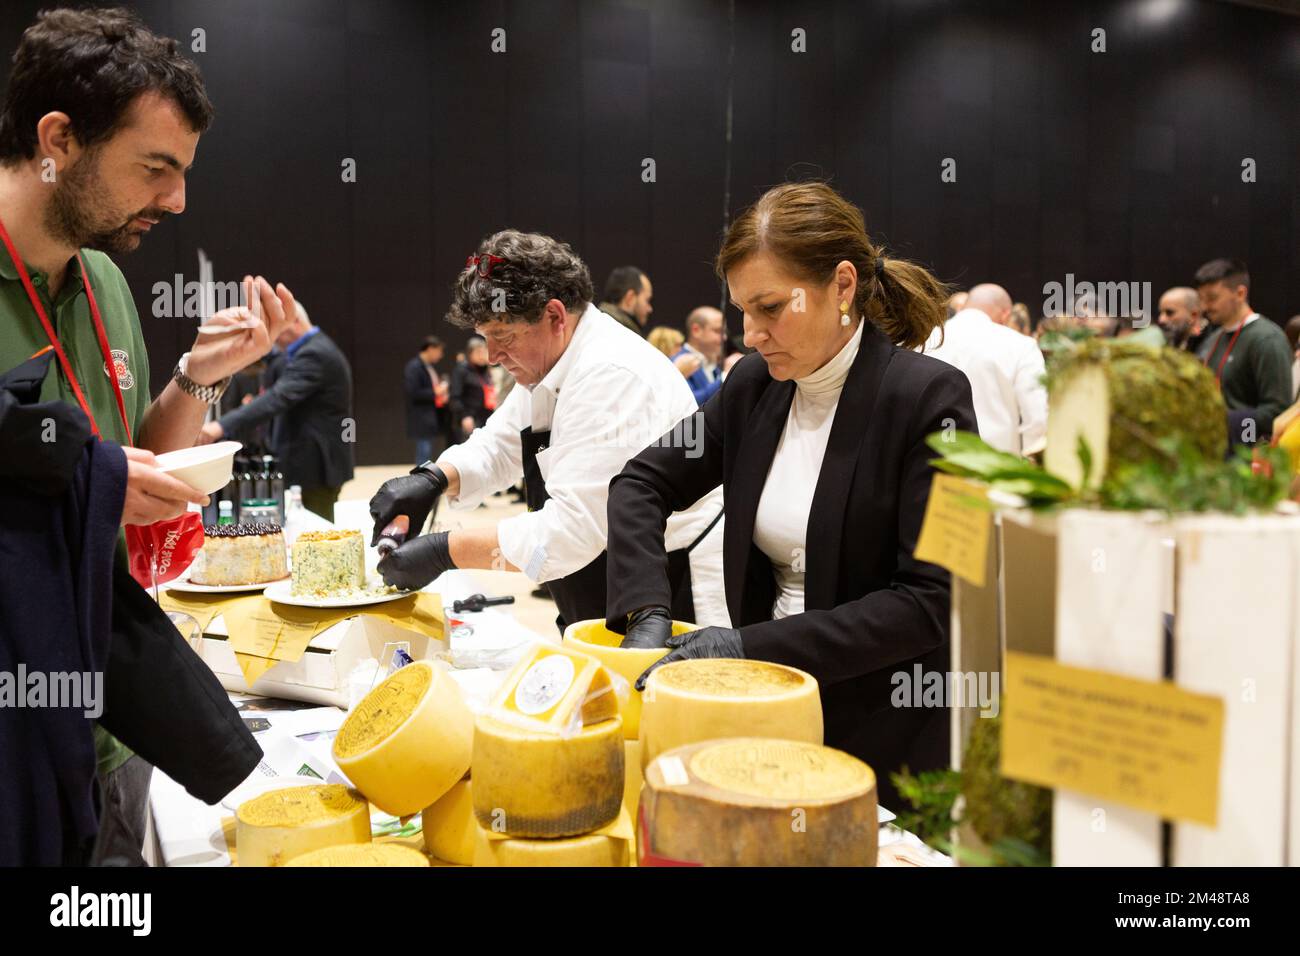 Cheese producers stall at Wine fair - Beve Bene - (Drink well) held by the Gambero Rosso organisation at the Nuvola in Rome's EUR quarter. Stock Photo